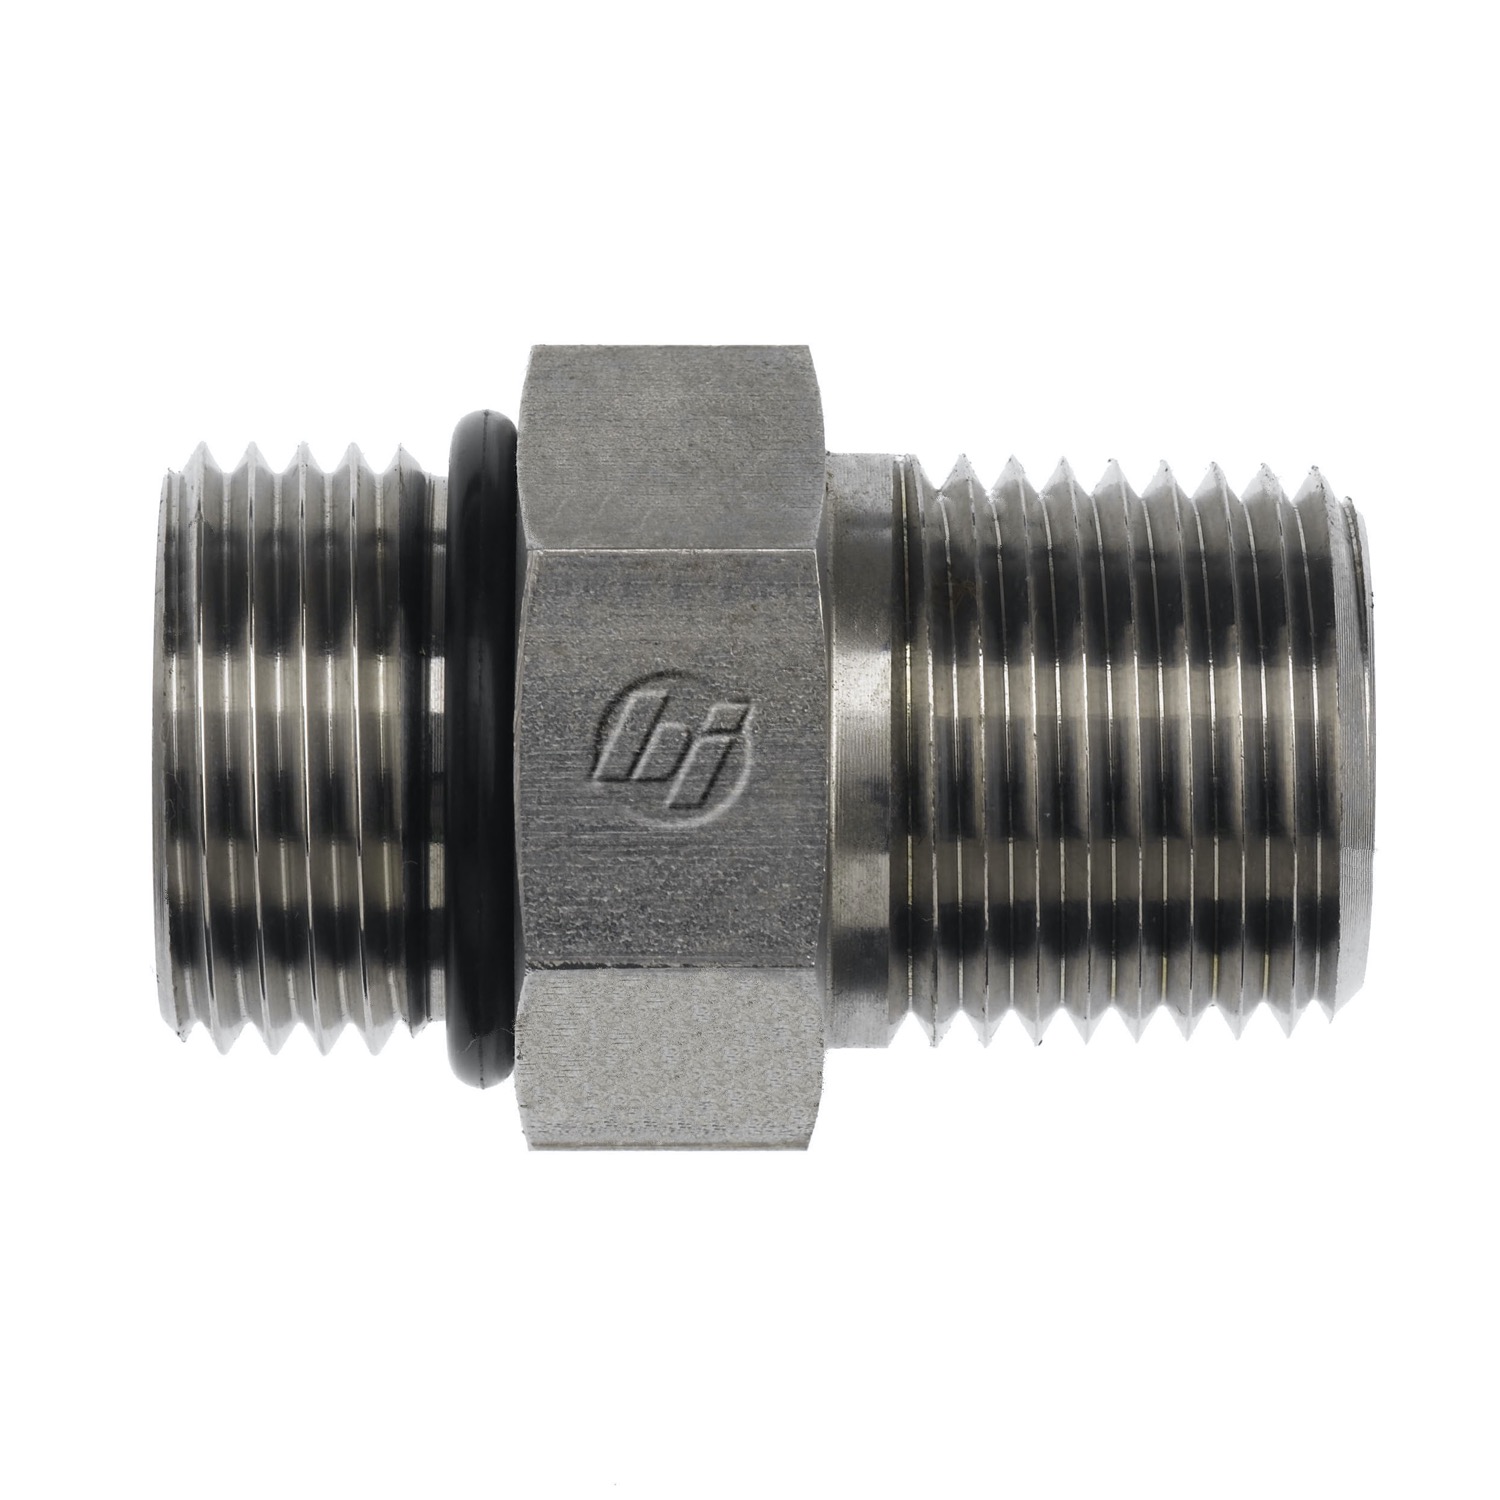 Hydraulic Hose Adapters - Straight Fitting, O-Ring Boss to NPTF, 6401 Series 6401-06-06-O